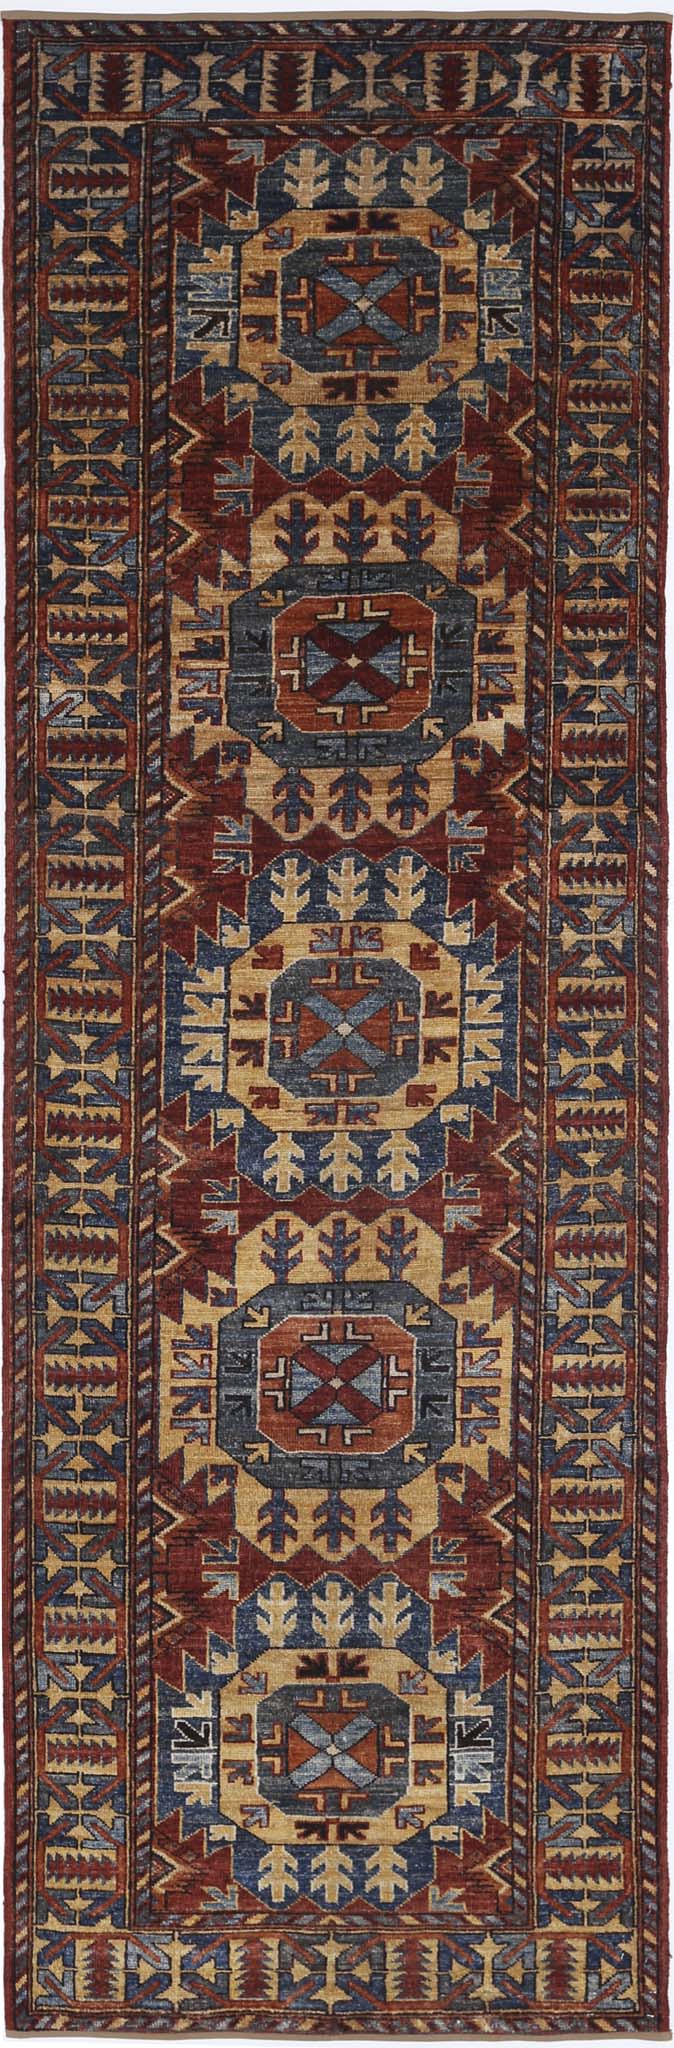 Tribal Hand Knotted Humna Humna Wool Rug of Size 2'11'' X 9'10'' in Red and Multi Colors - Made in Afghanistan